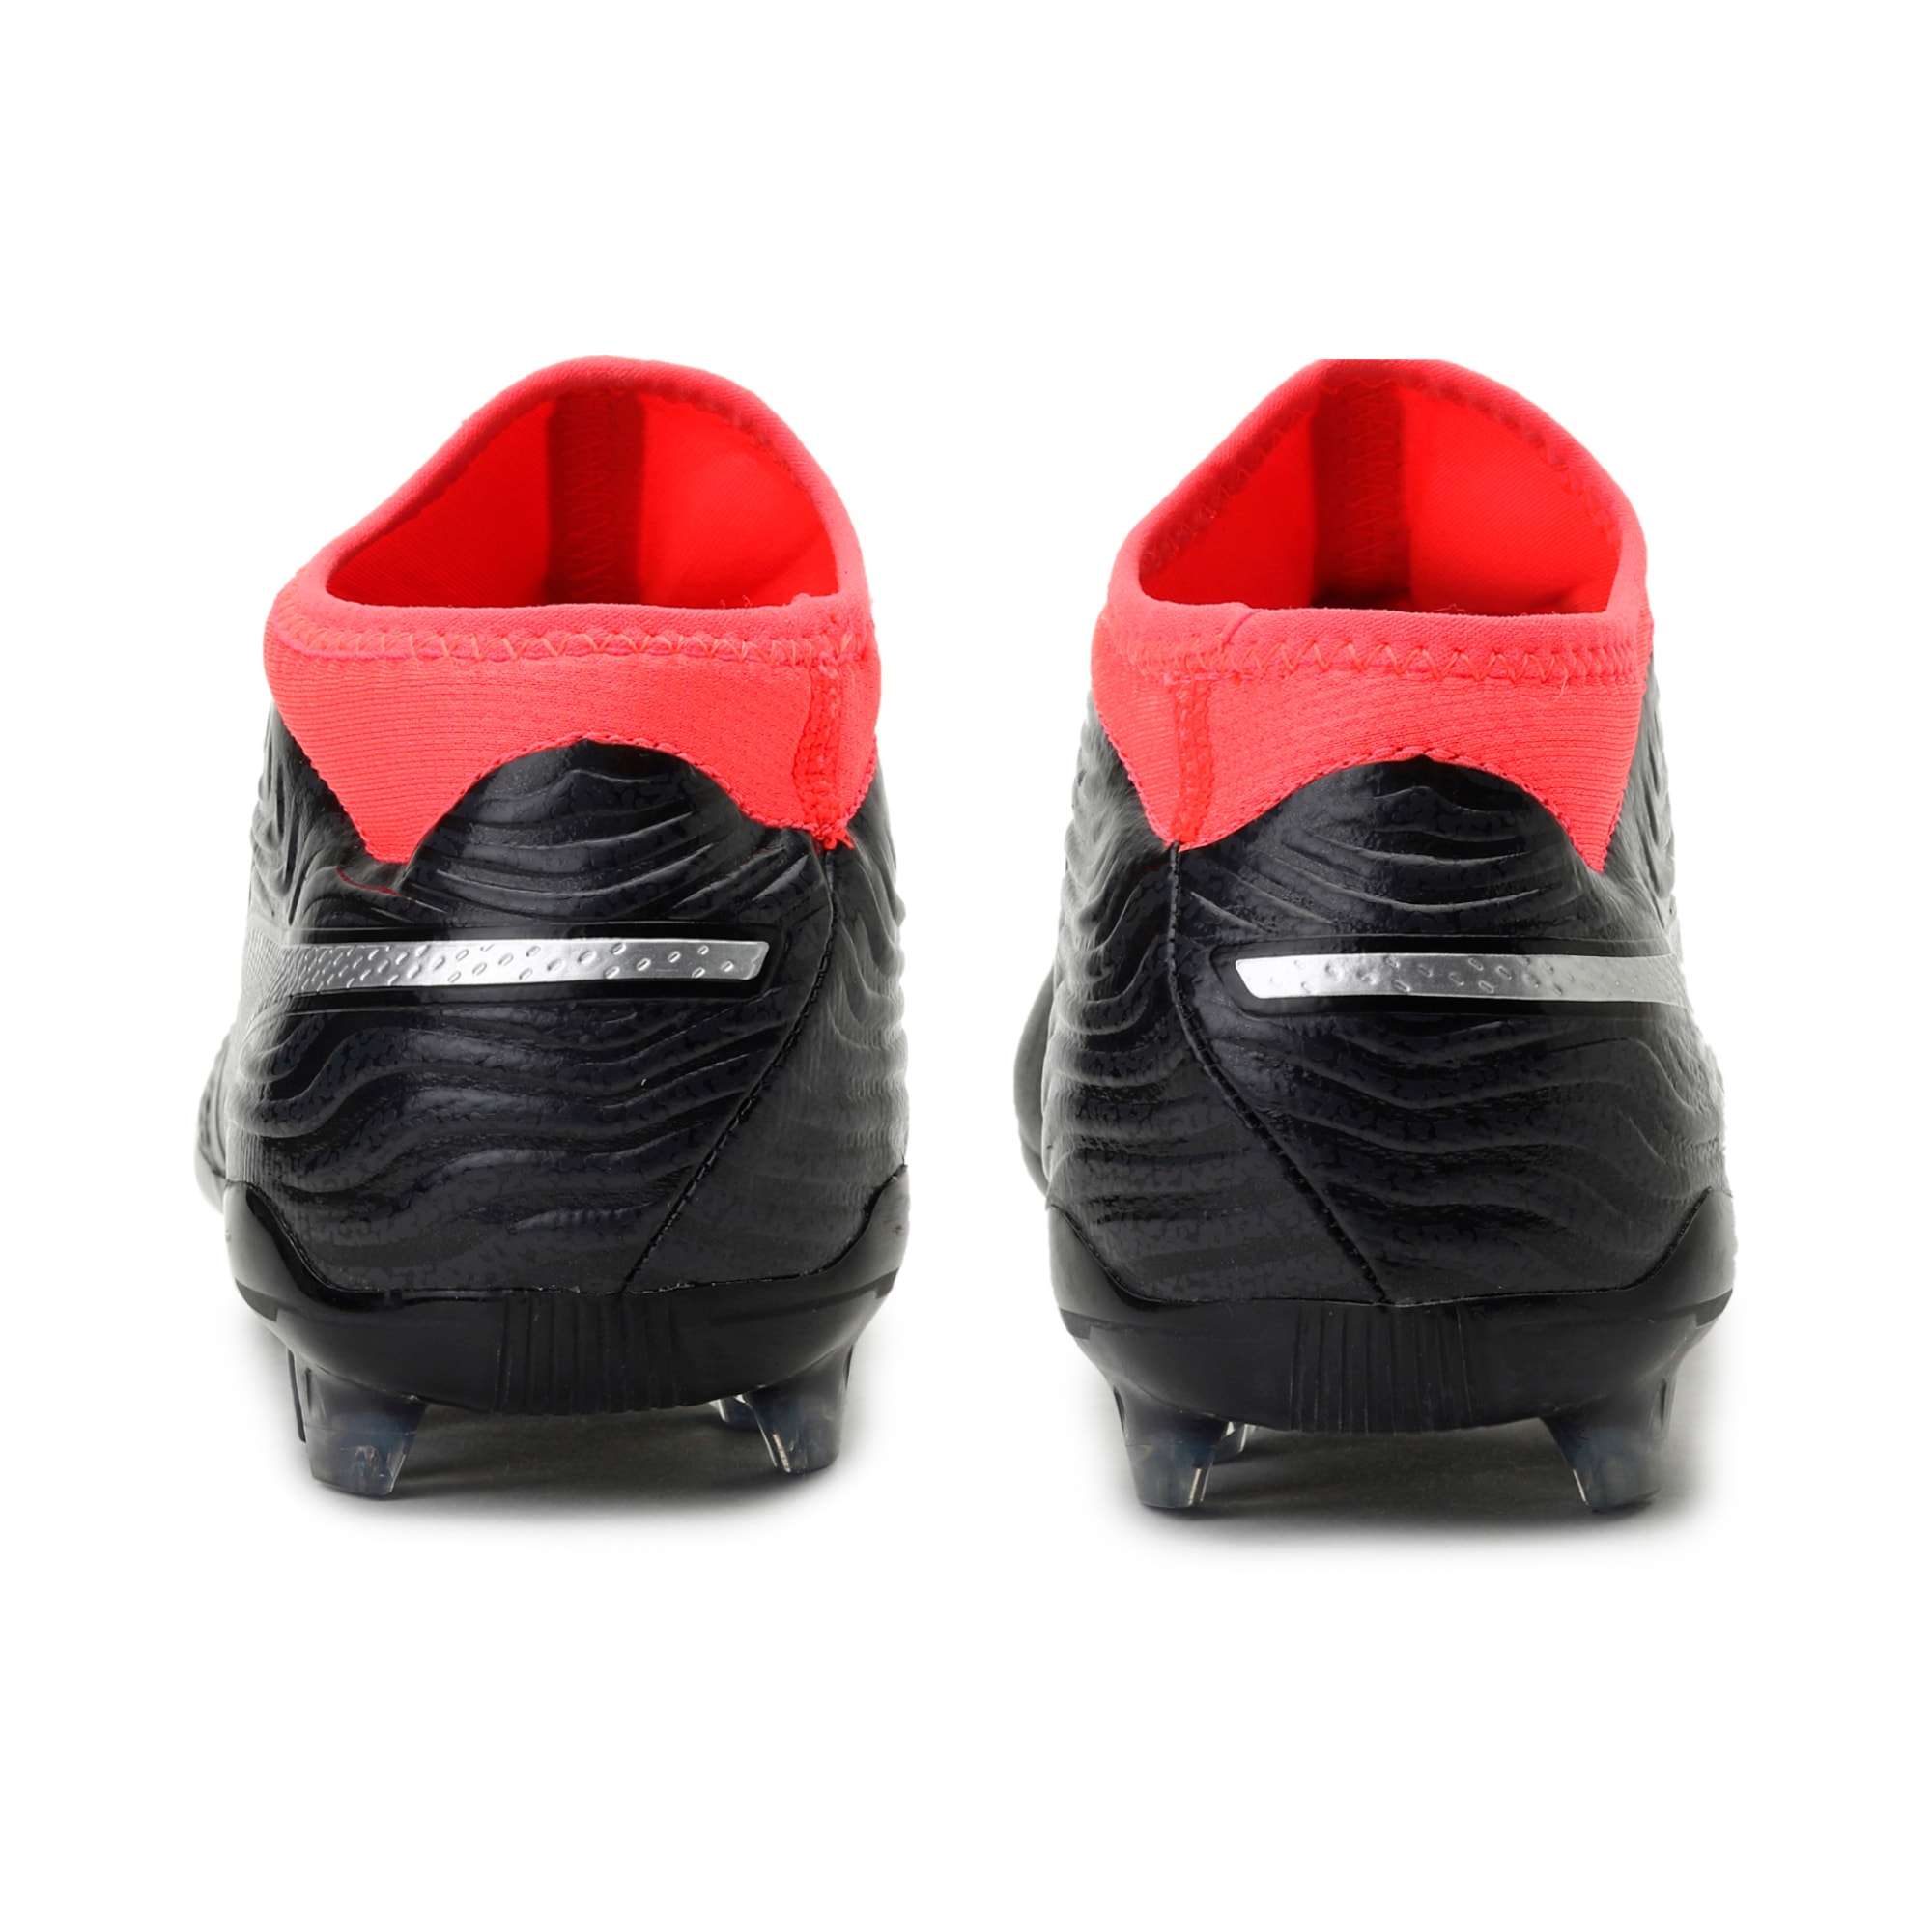 One 18 2 Fg Men S Football Boots Black Silver Red Puma Shoes